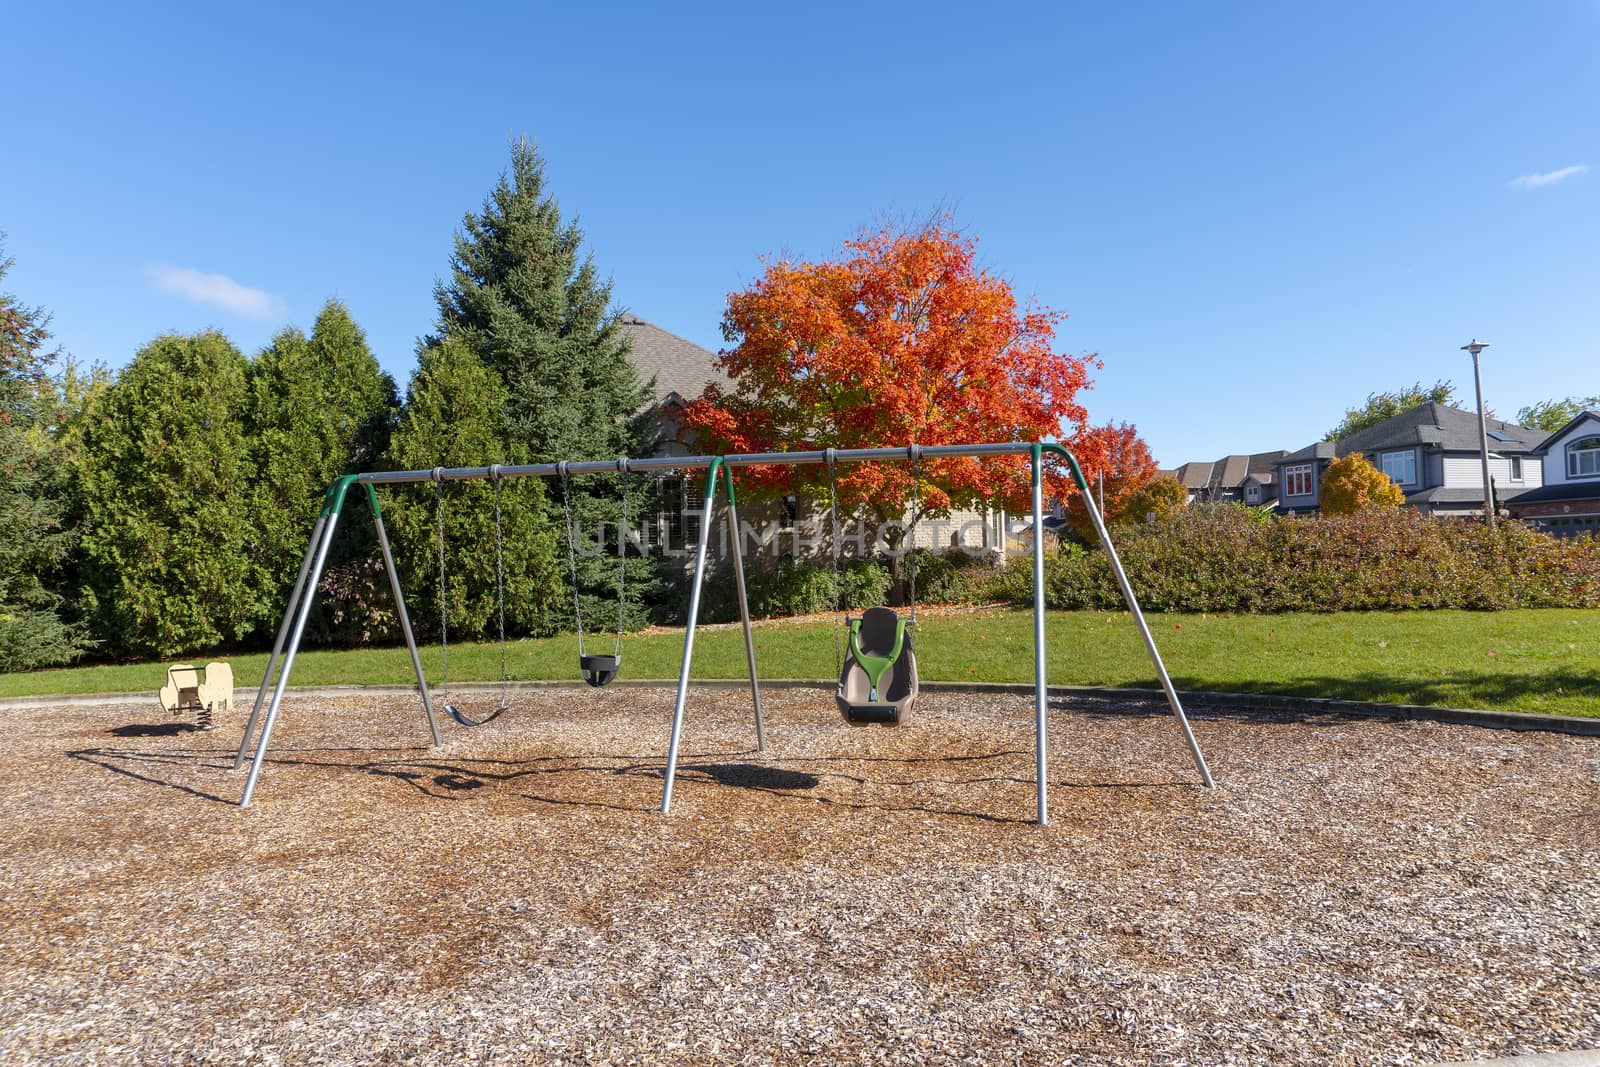 Swings on a playground against red maple by ben44